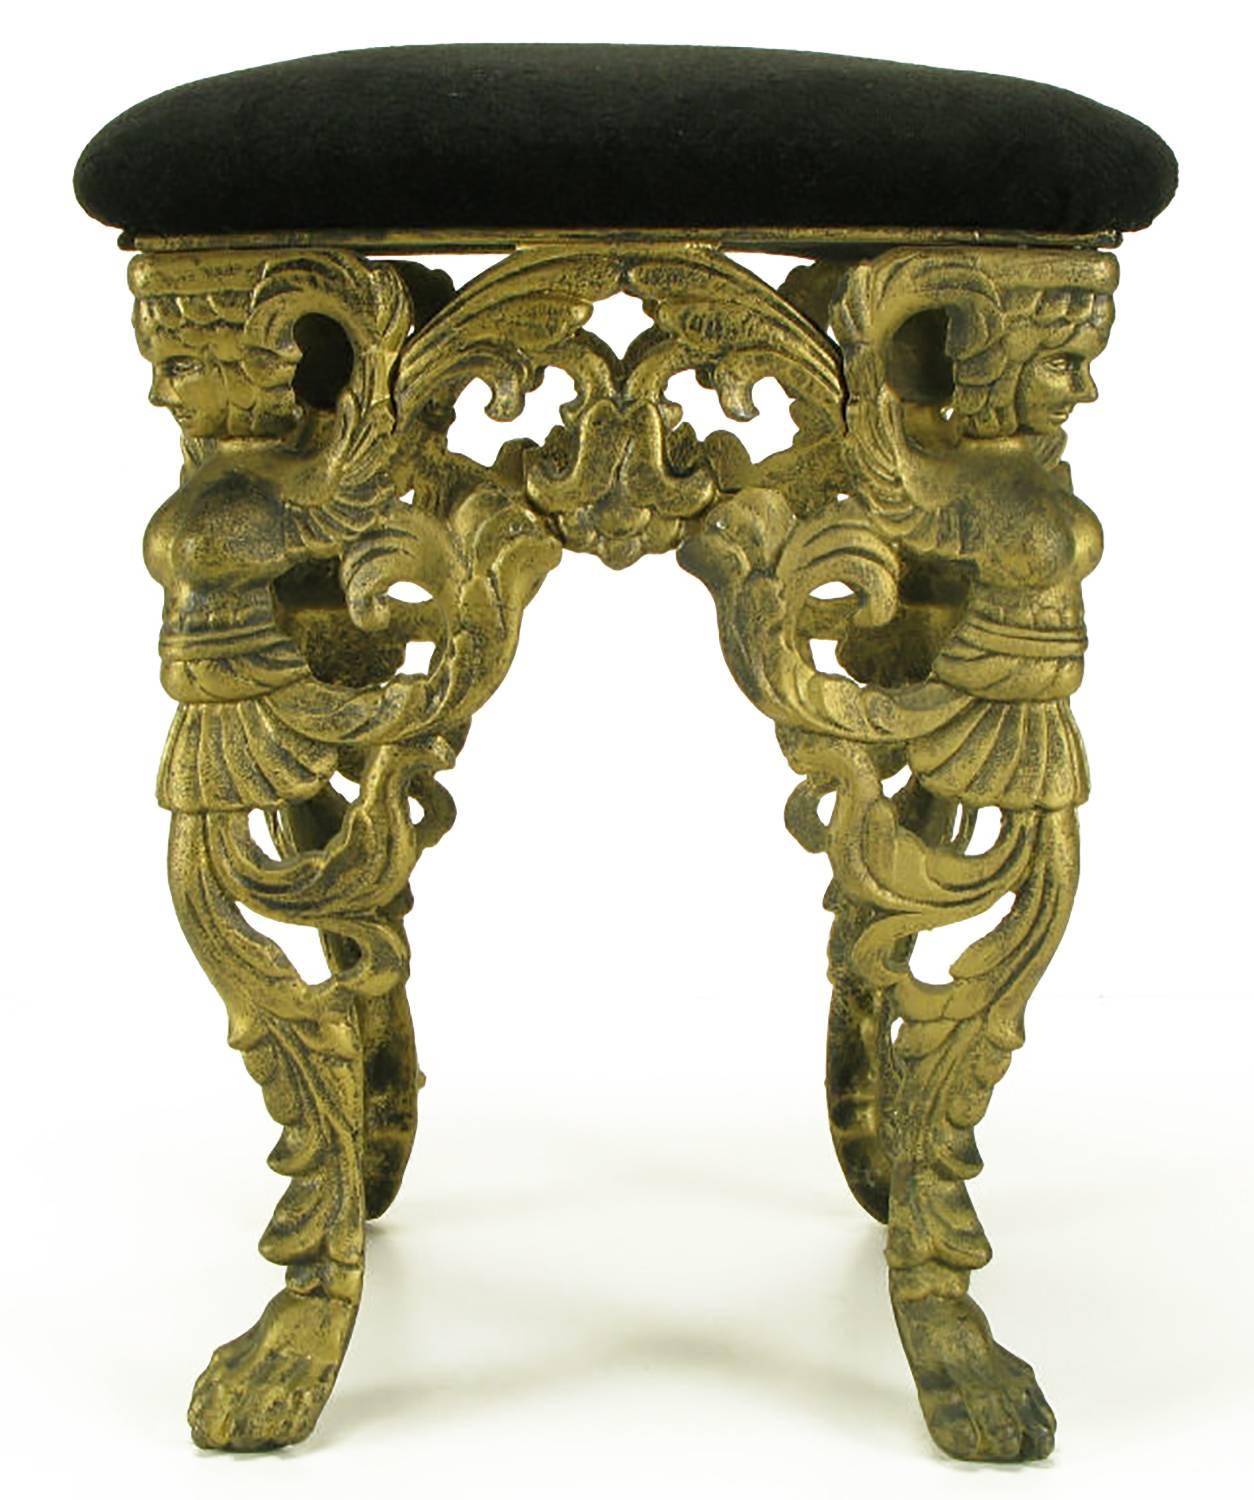 Cast iron Empire style bench with paw feet, draped swag and winged maidens, patinated bronze lacquer finish. Black textured velvet seat covering. Would also make an uncommon vanity seat.